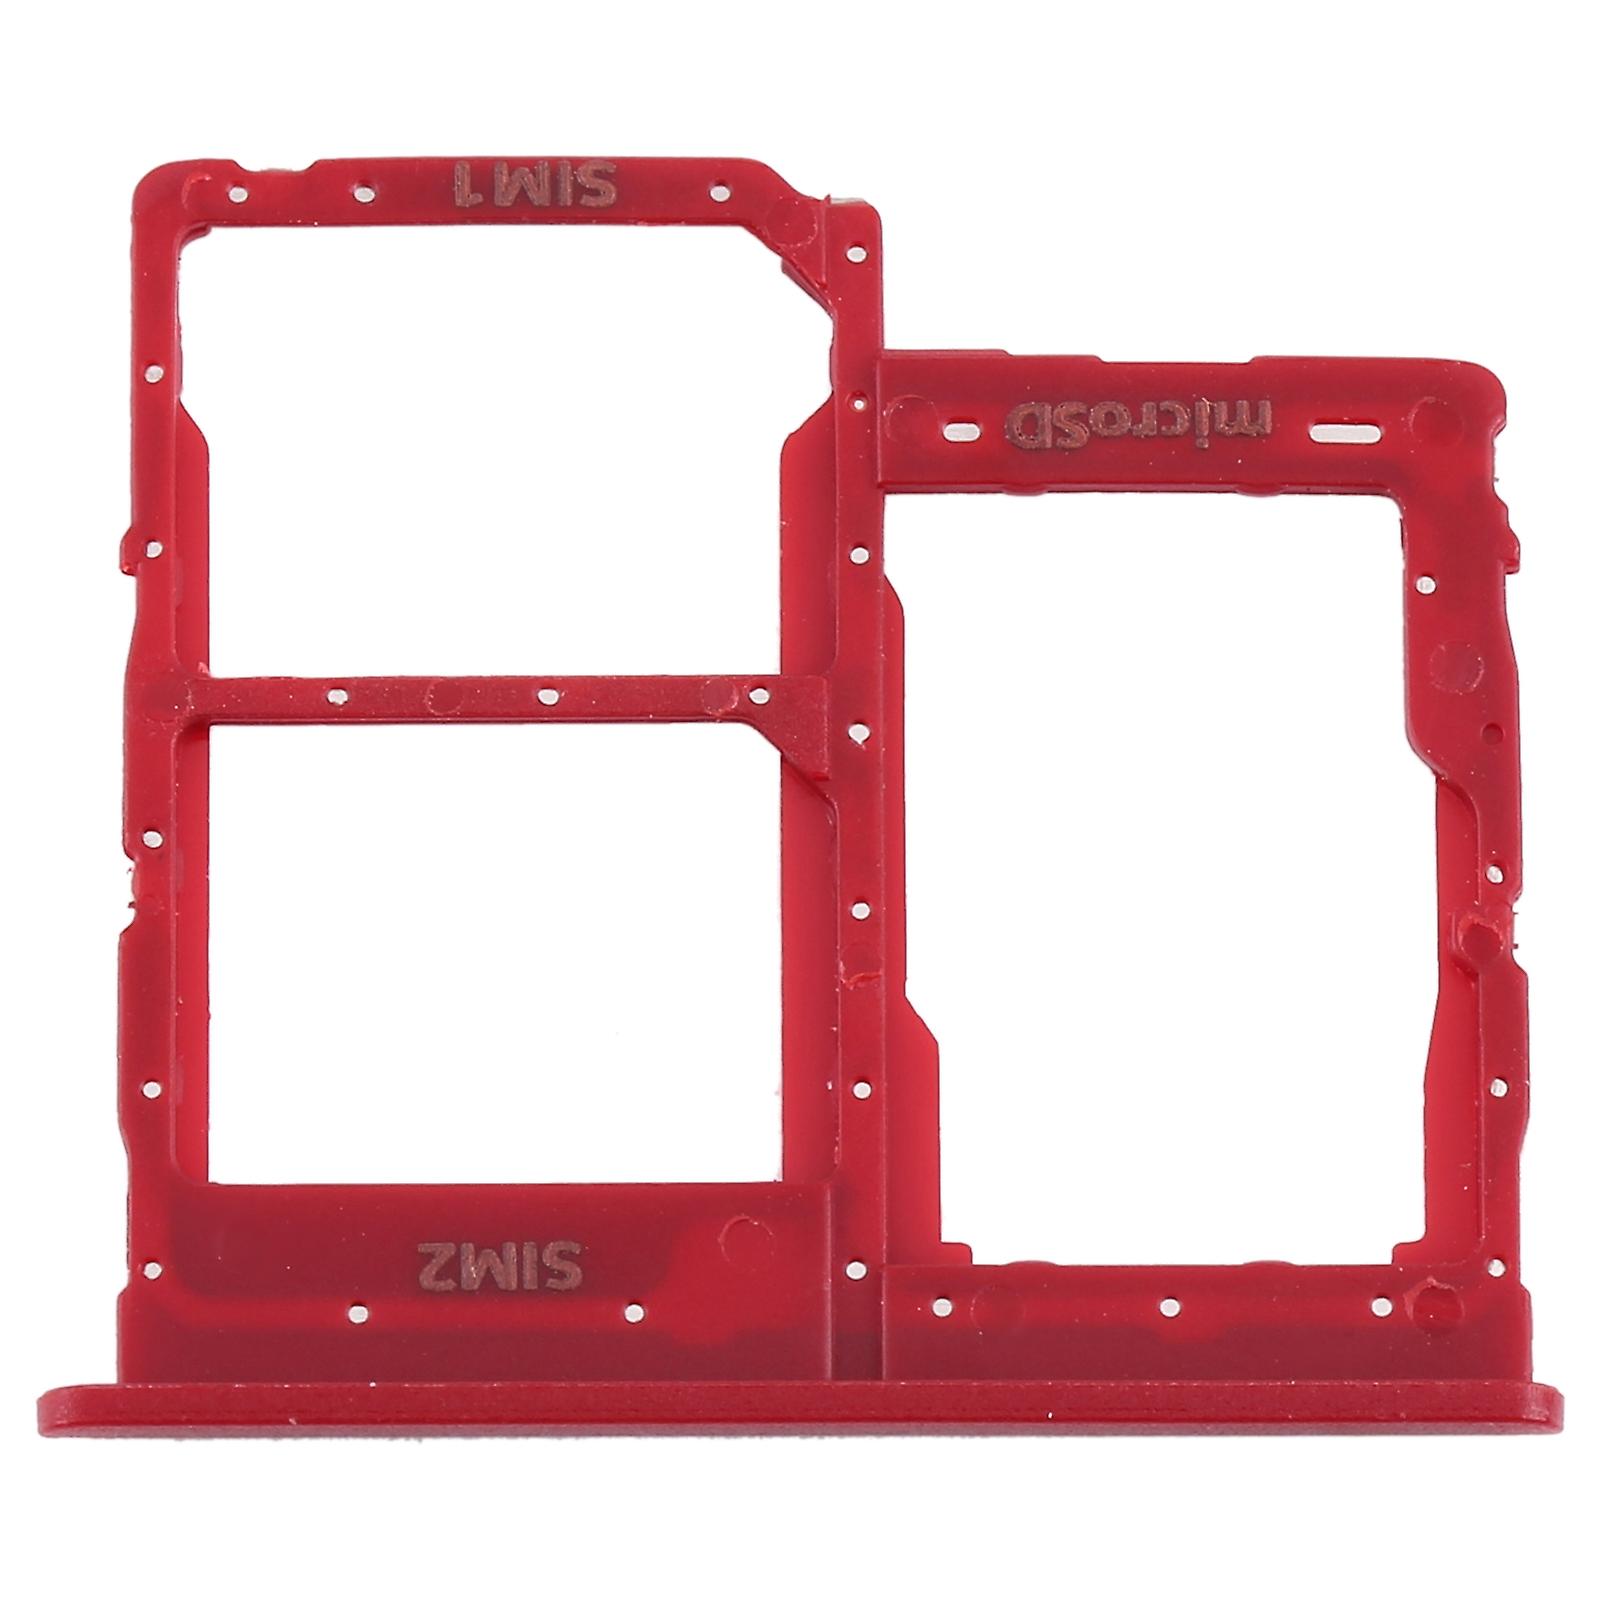 Galaxy A01 Core A013 SIM Tray in Red